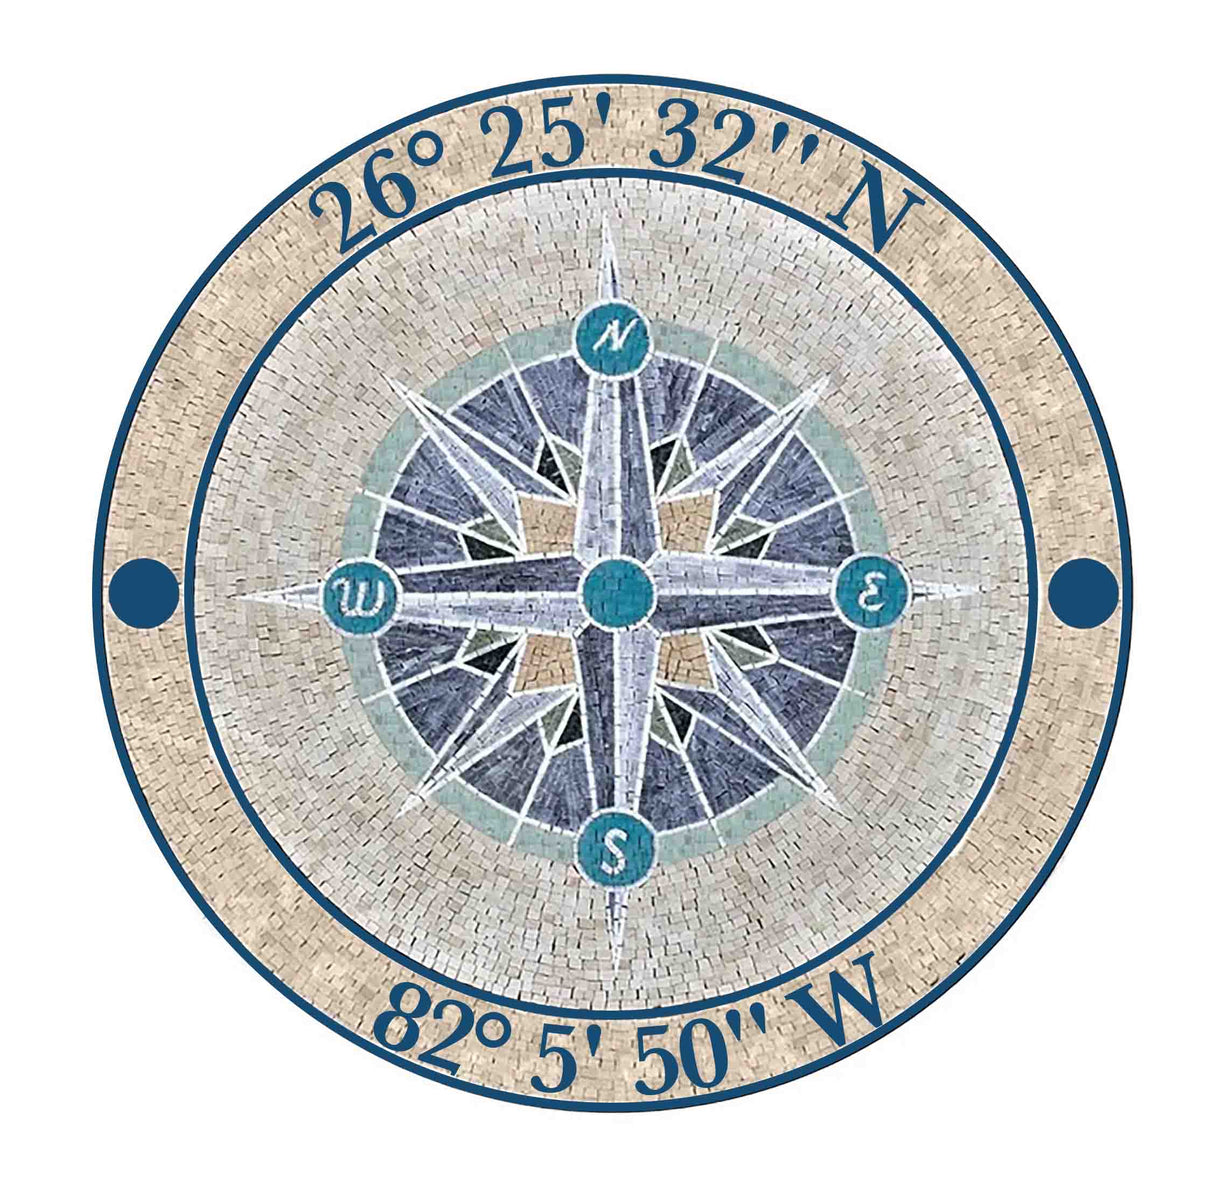 Customize Your Own Unique Design Marble Mosaic Medallion With Coordinates, Shipping Worldwide